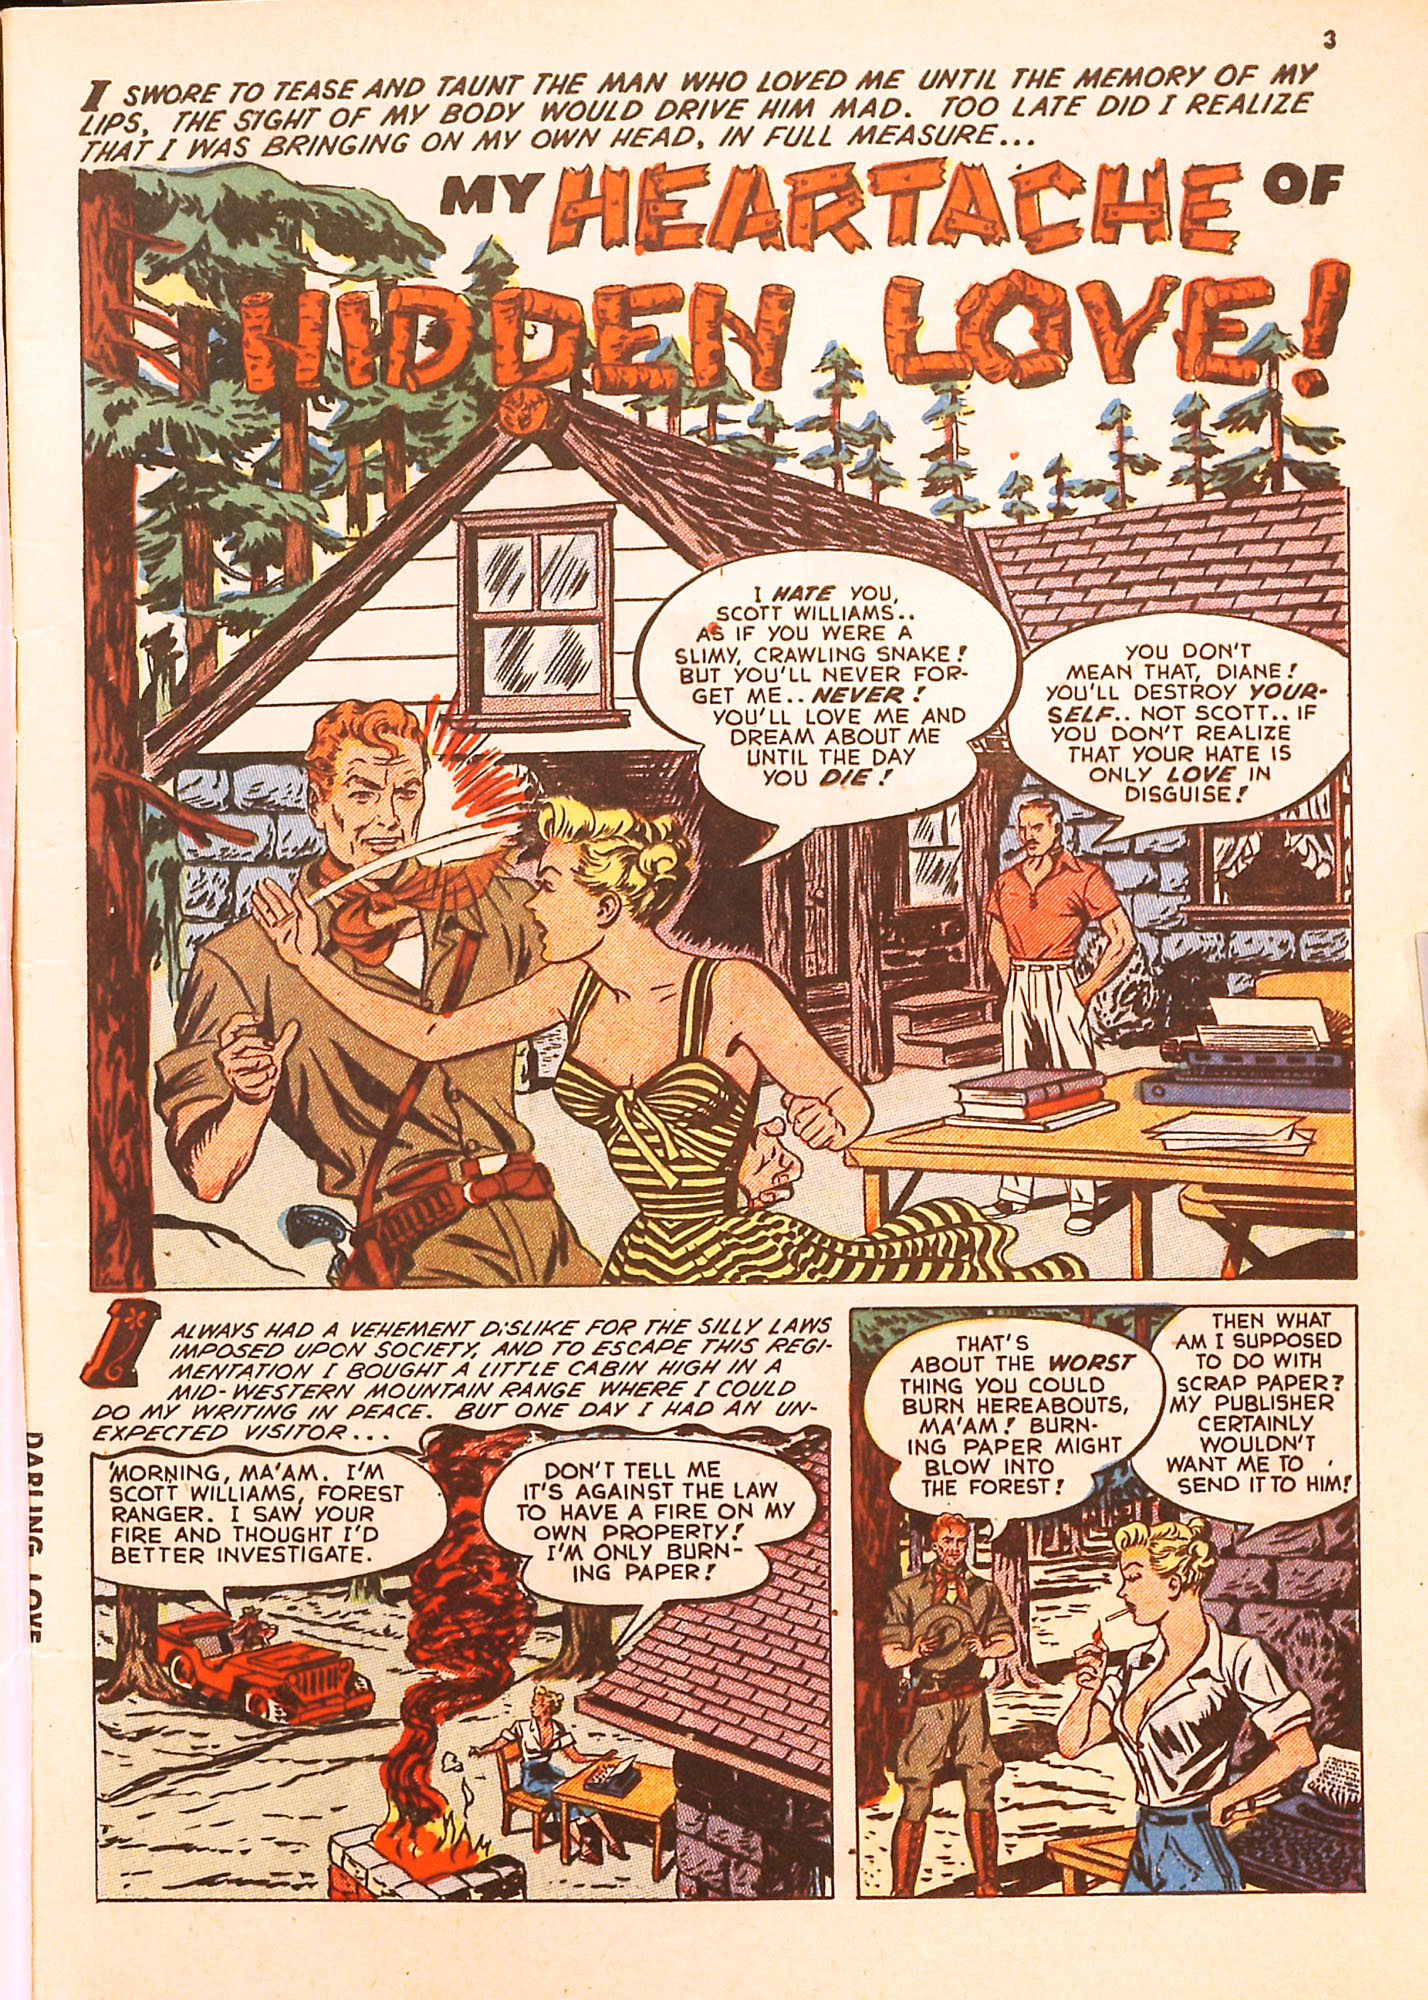 Read online Darling Love comic -  Issue #5 - 3